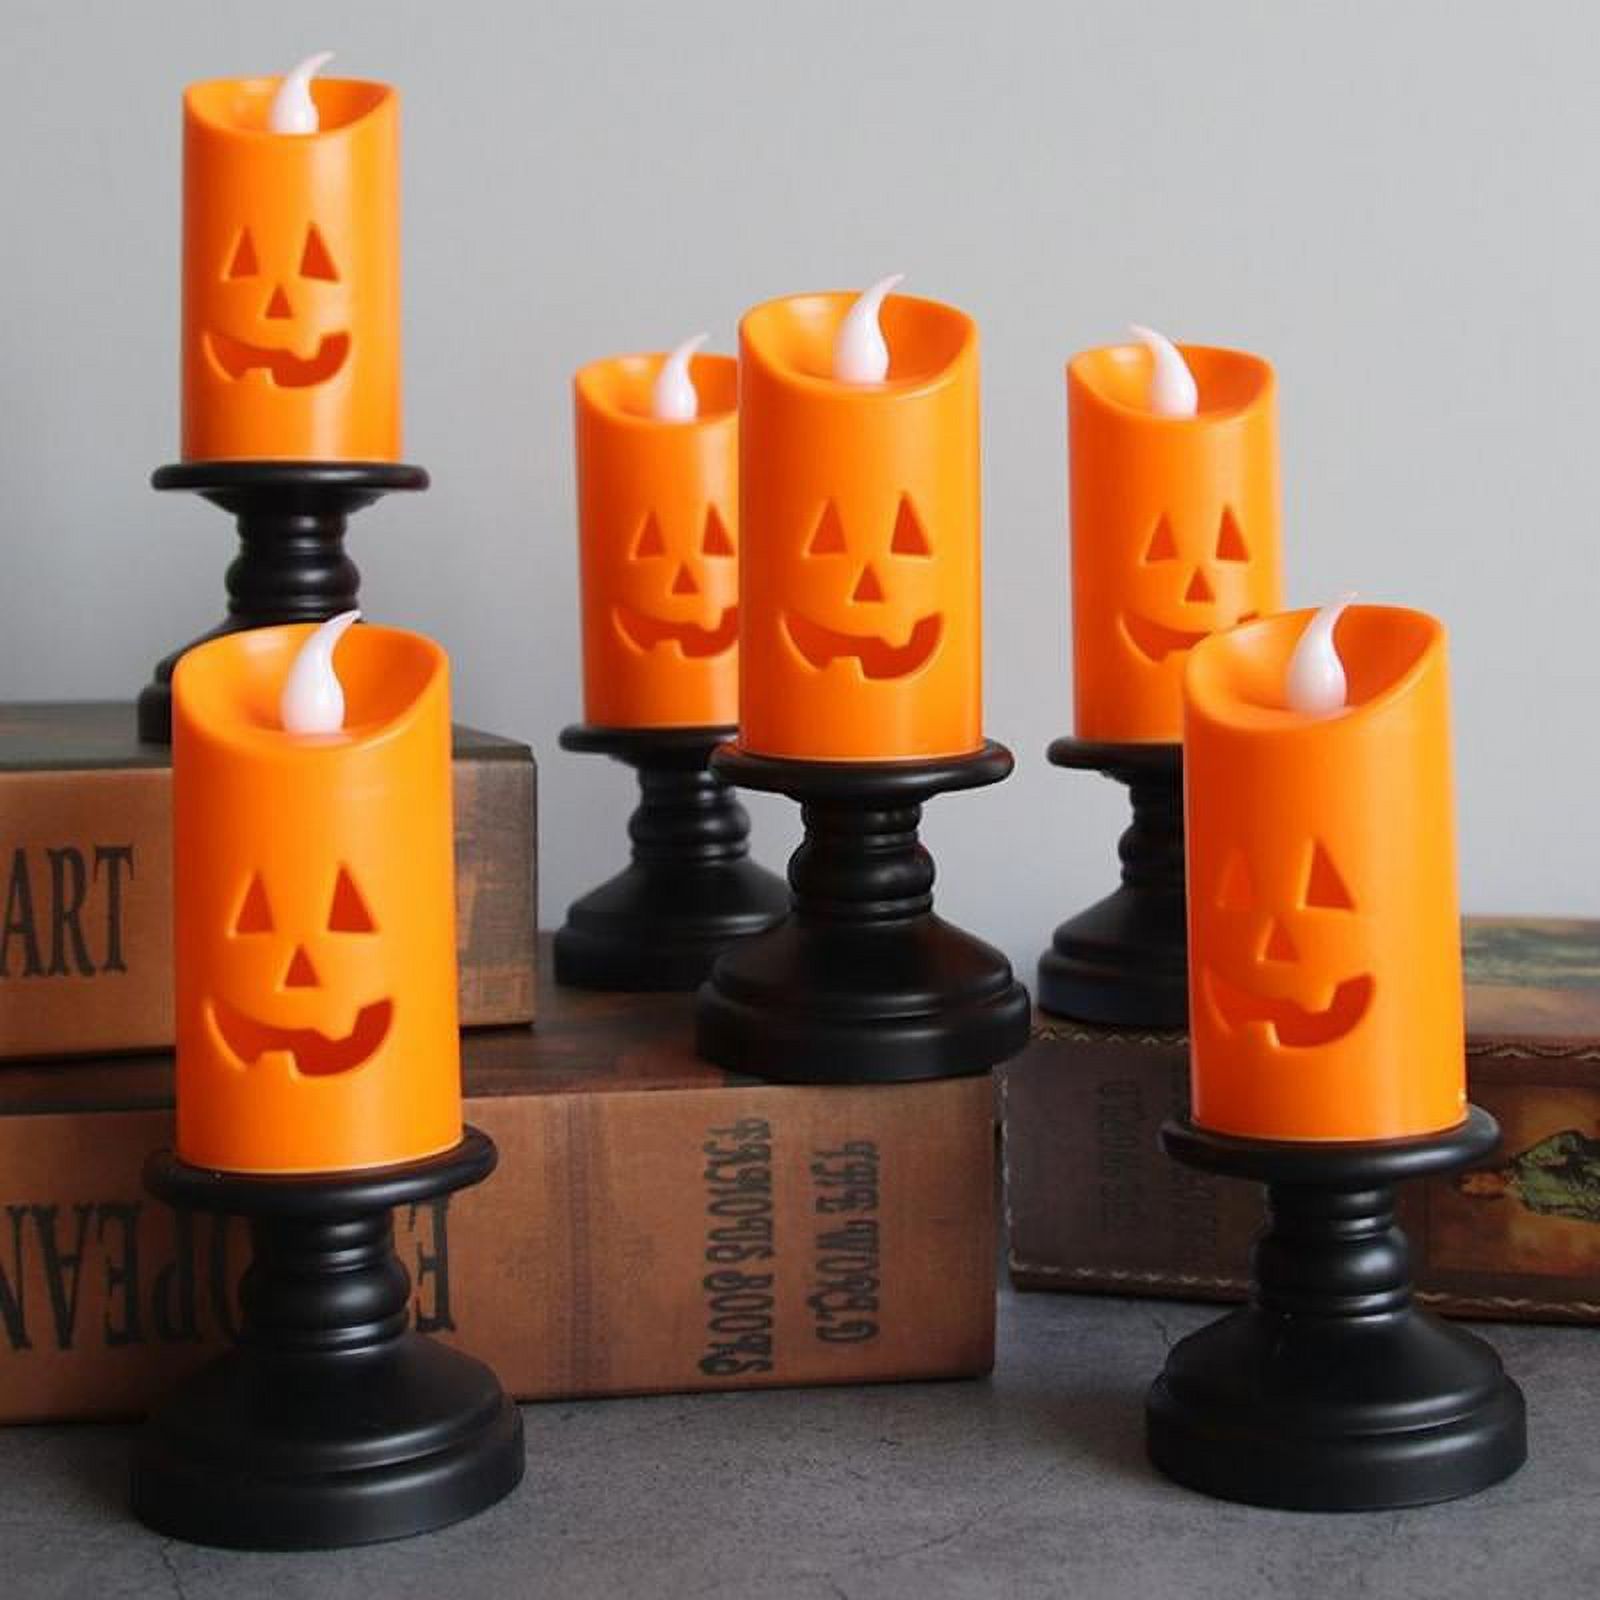 6 PACK Halloween Pumpkin Candle Light, Halloween Orange Flameless Candle Lights LED Lamps Festival Decor Light for Halloween Party - image 1 of 13